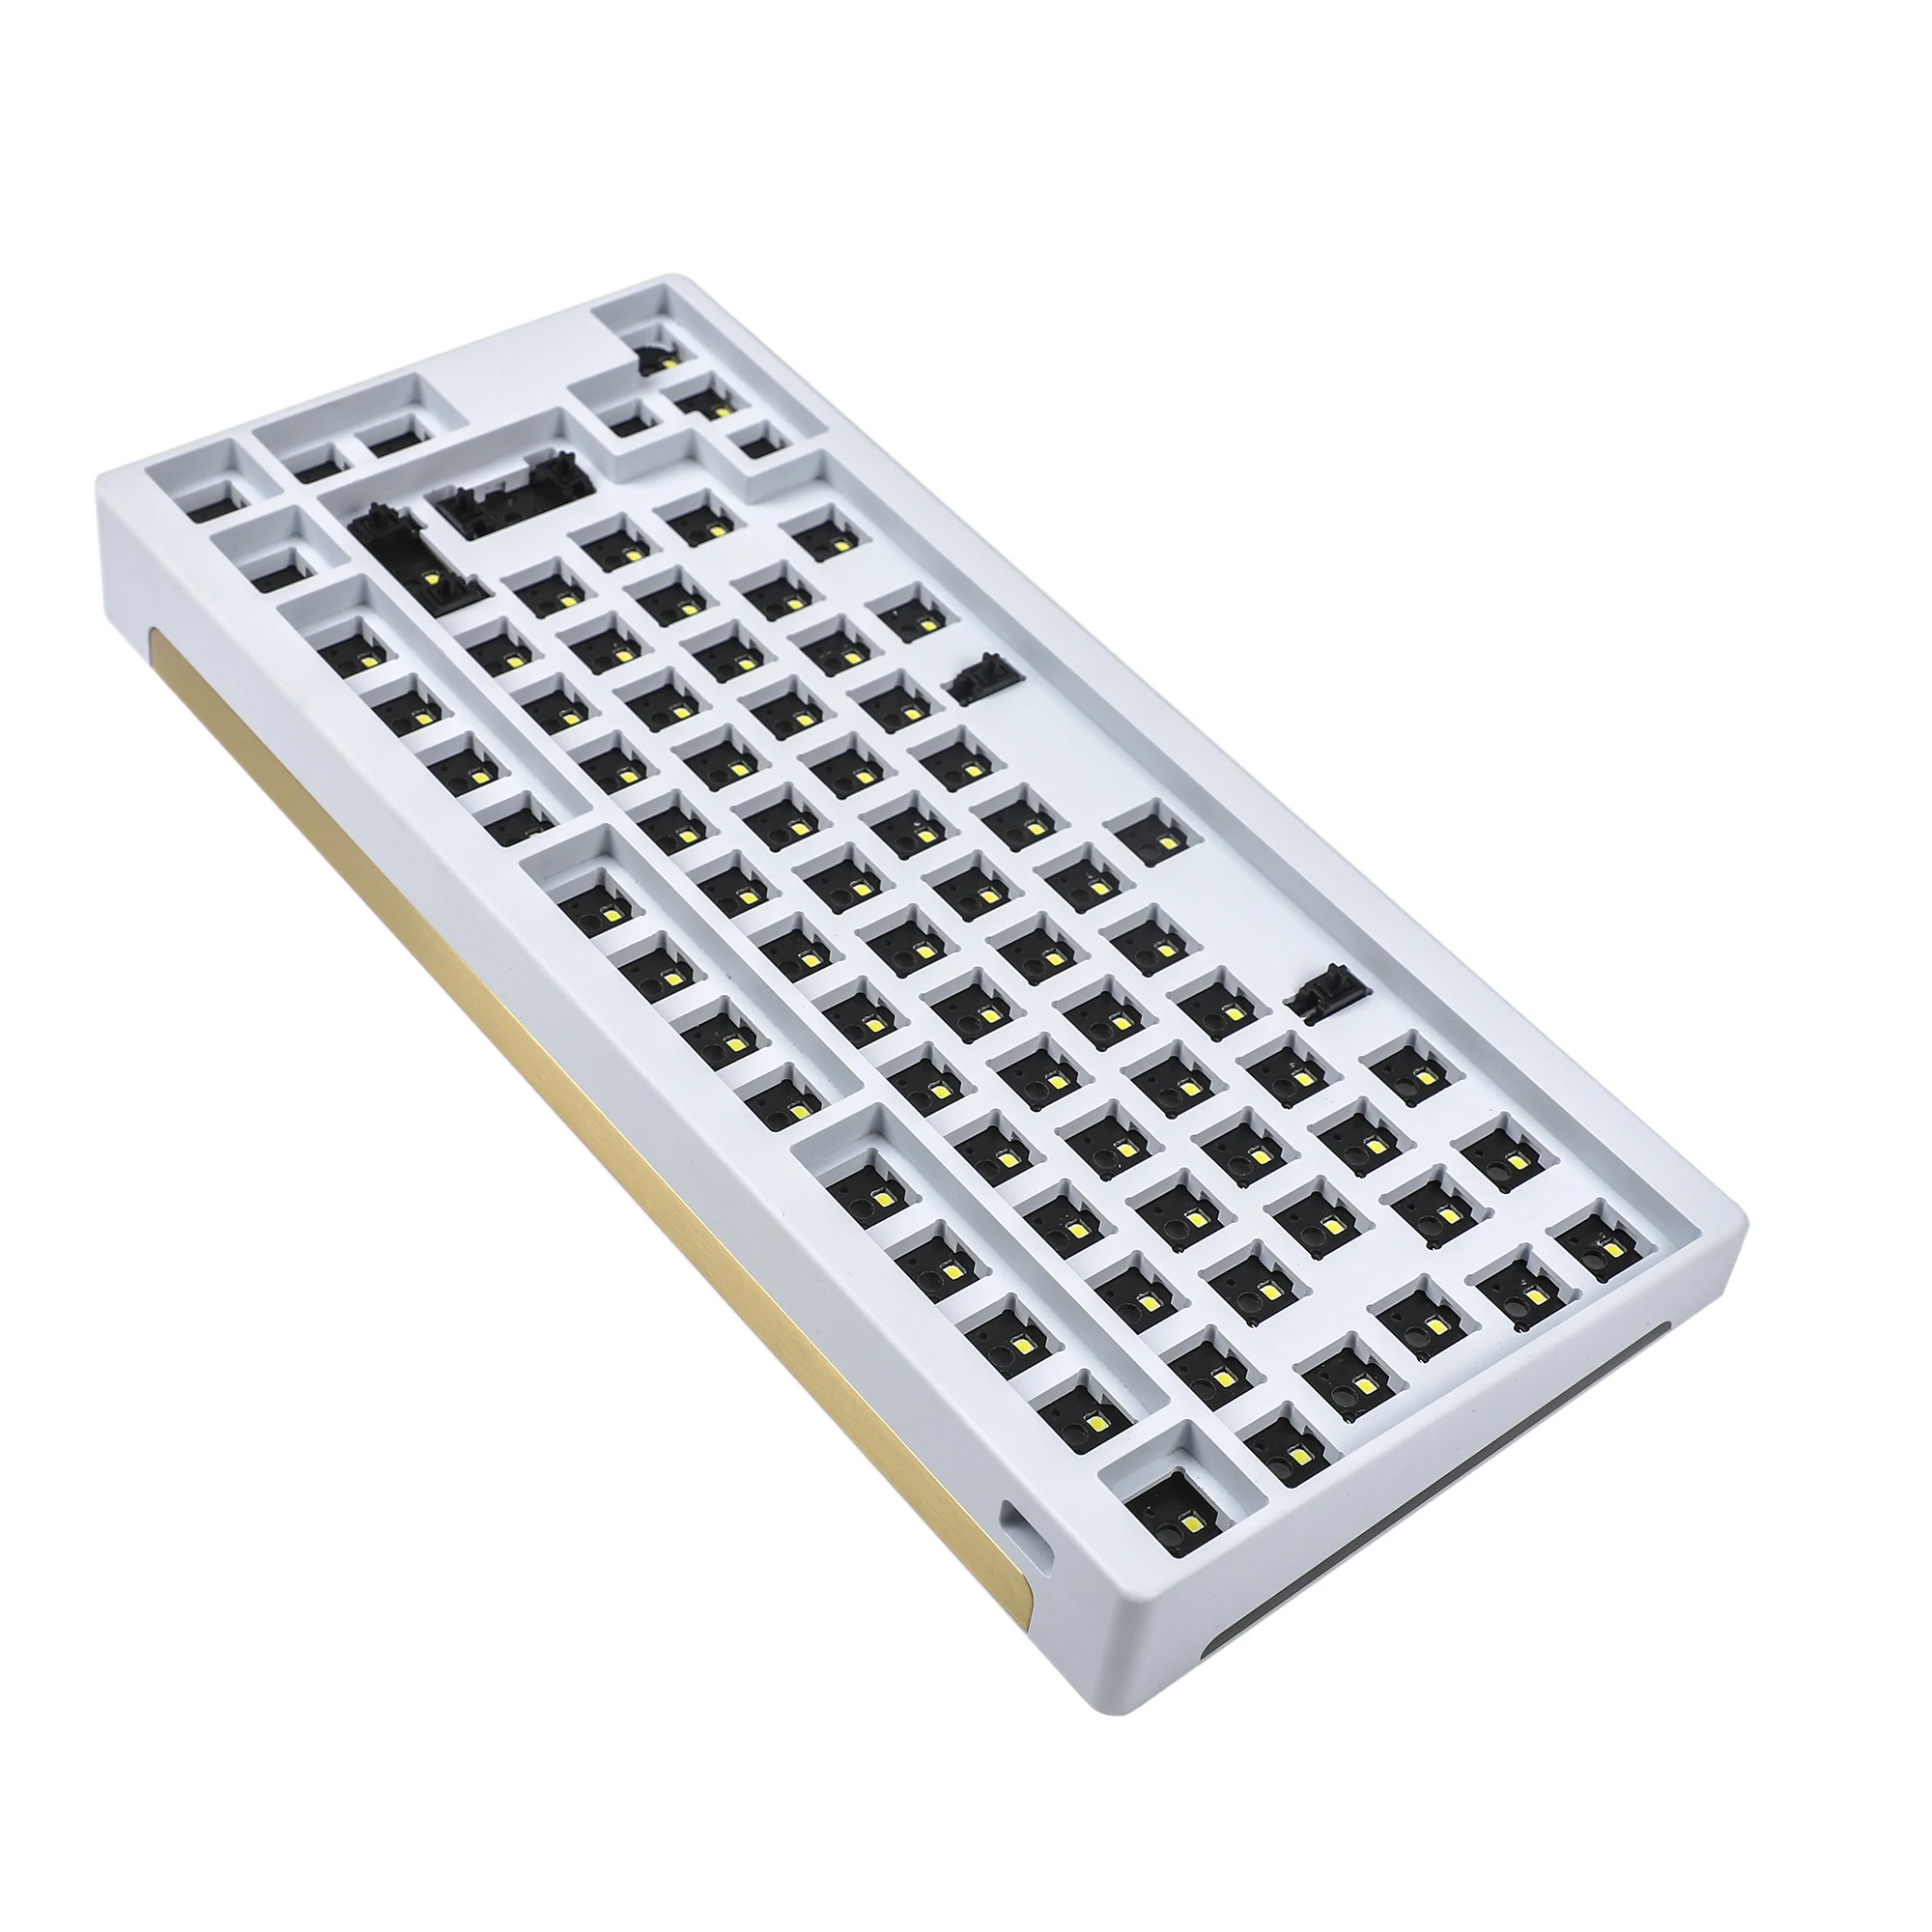 ID80 V2 ISO QMK Anodized Aluminum Case Powder Coat Plate hot swappable Hot Swap Type C PCB VIA Mechanical Keyboard Kit